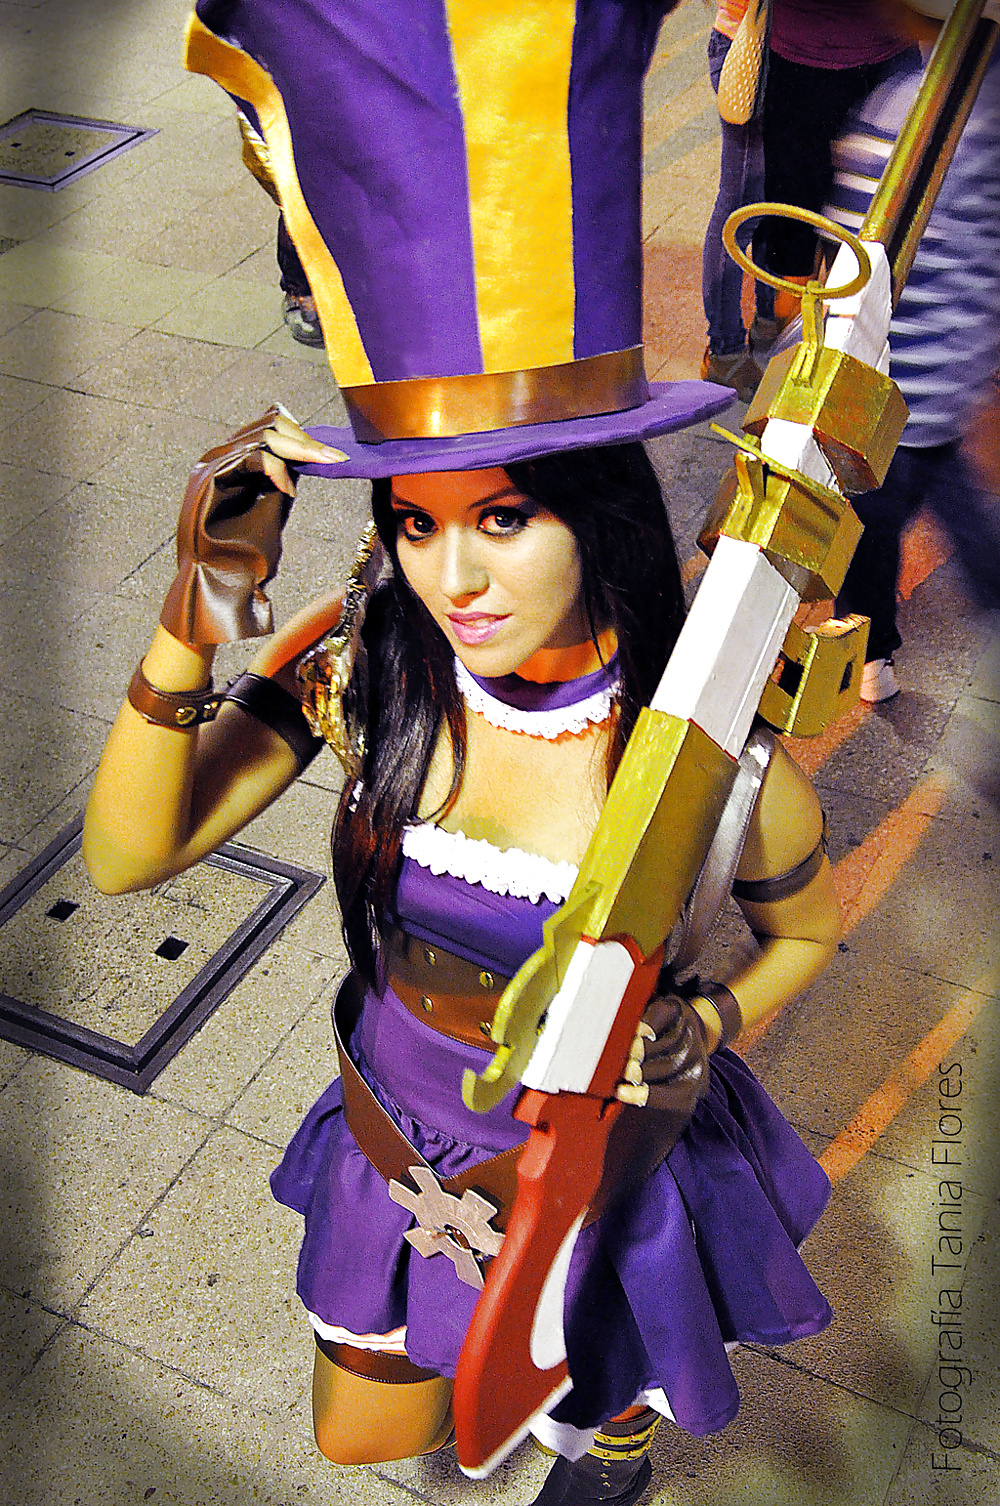 League of Legends Cosplay #31144159